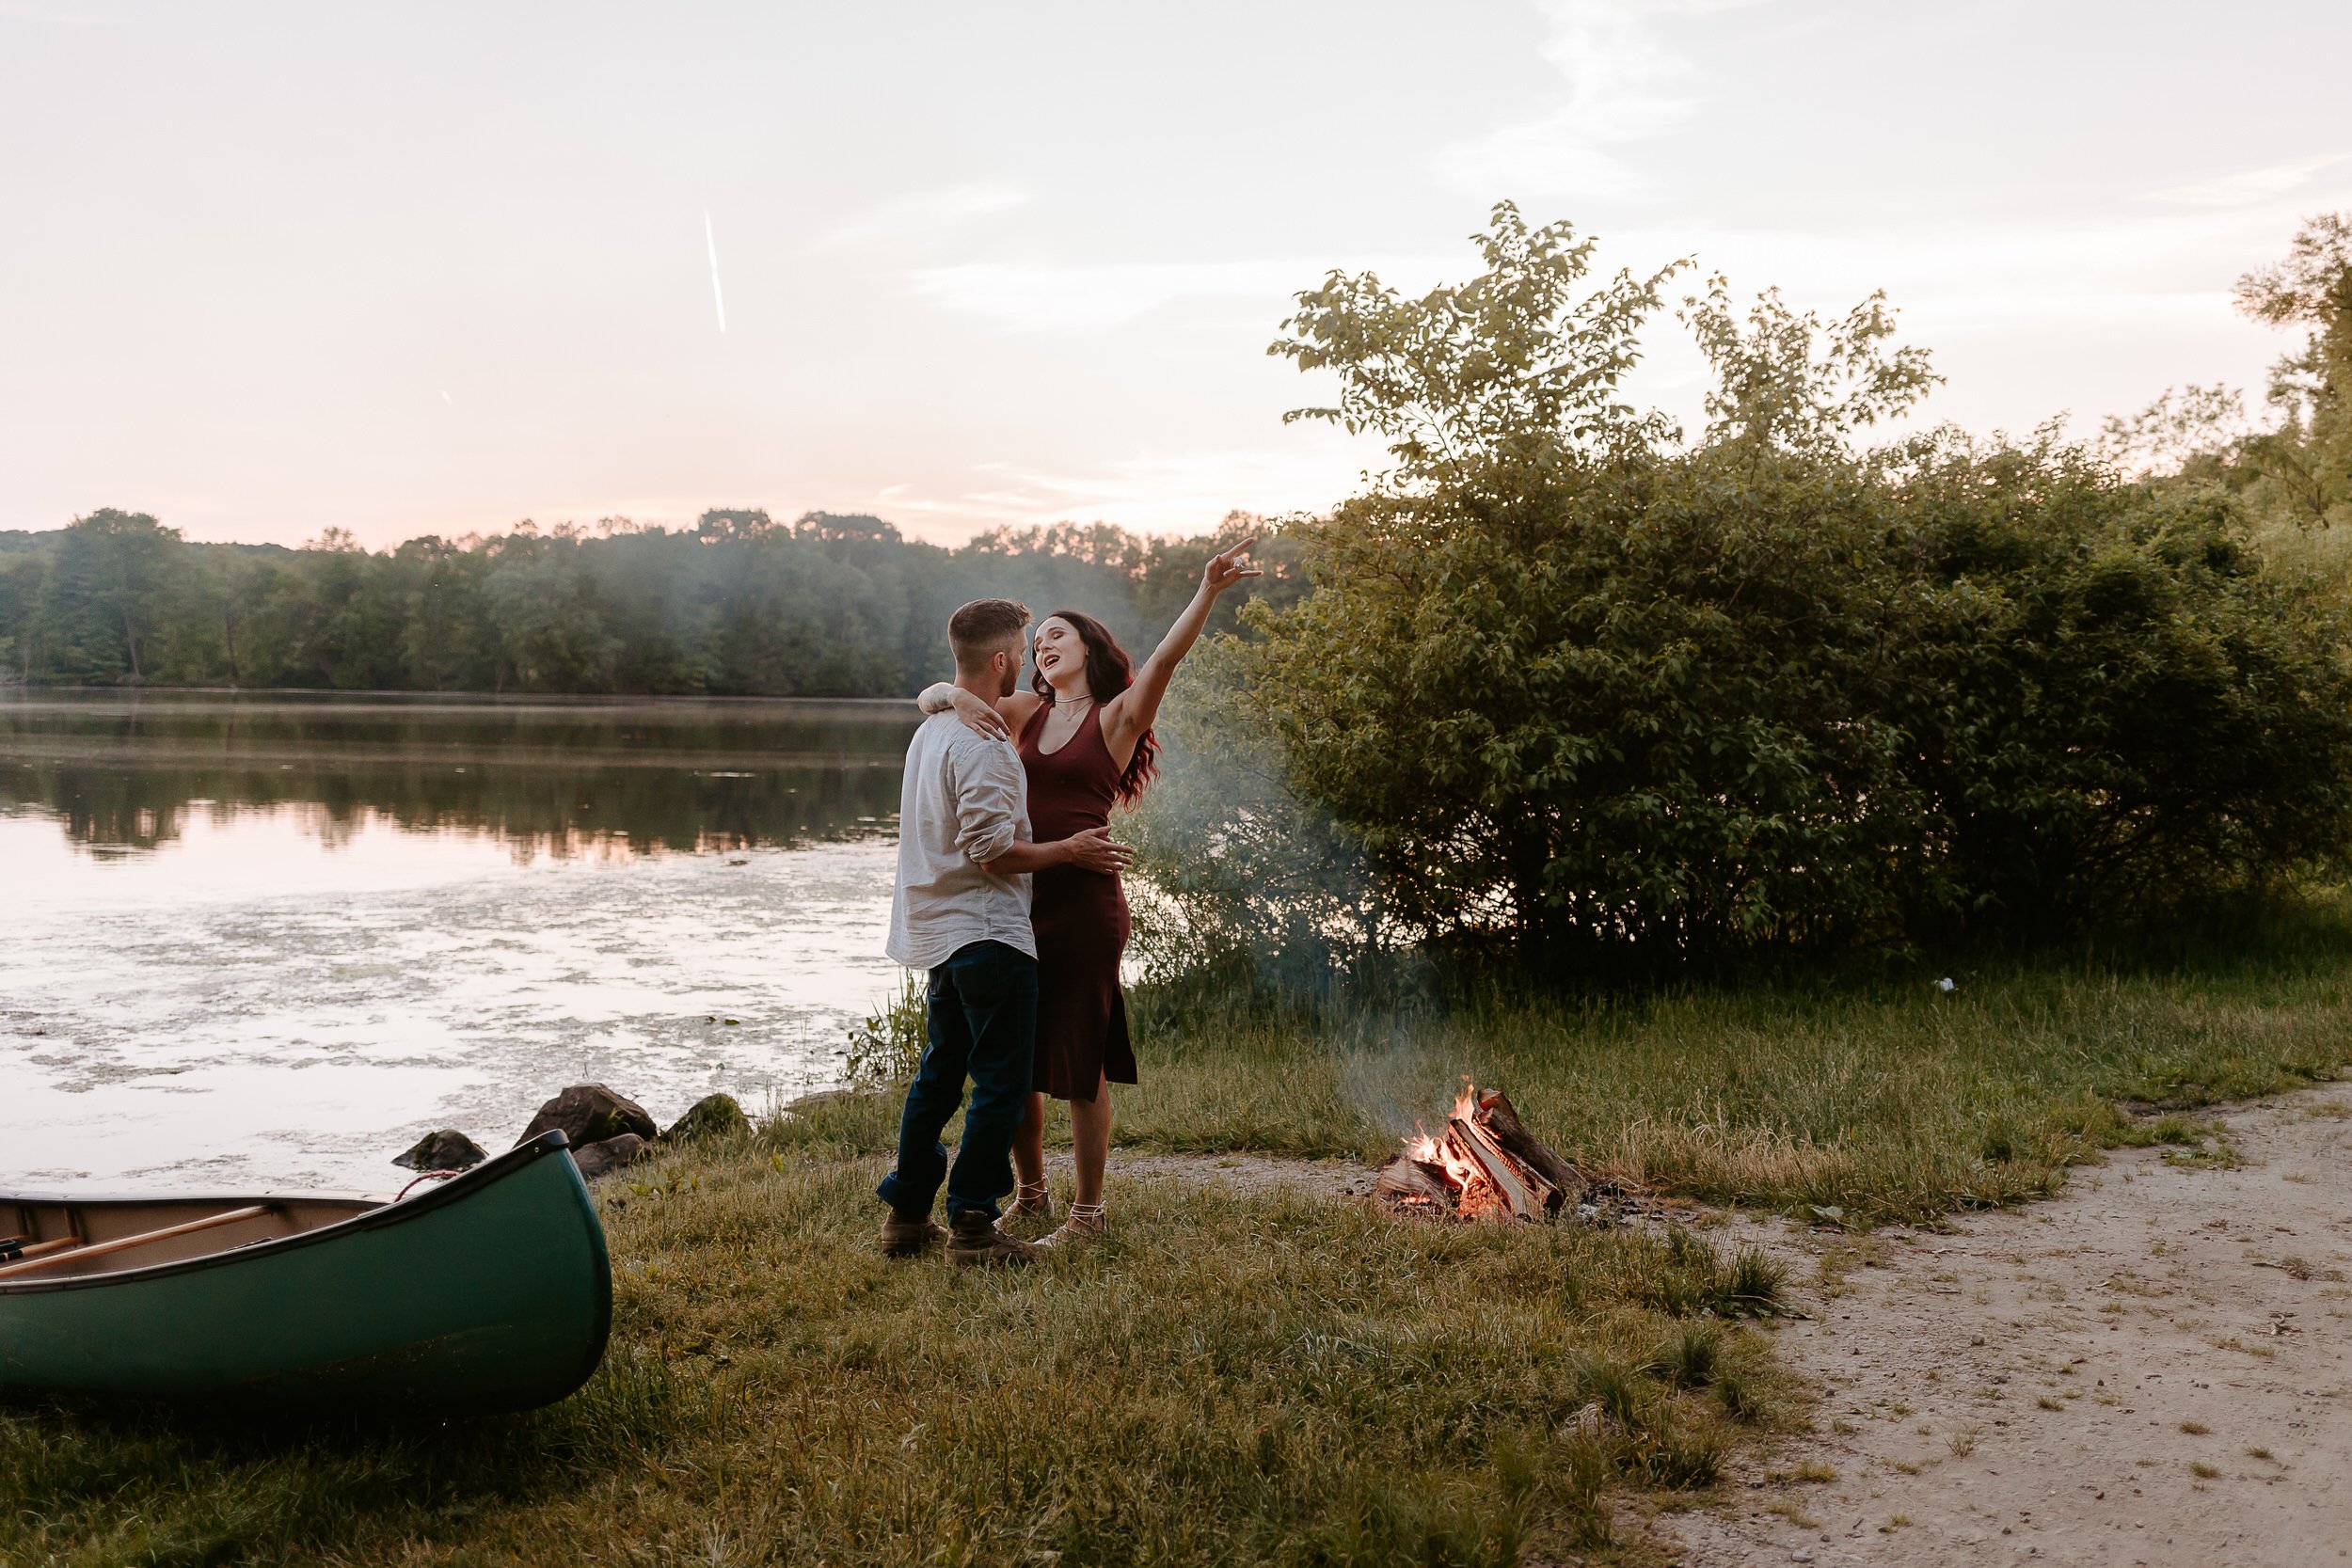 Woman and her fiancé dance by a campfire in front of a lake during sunset.